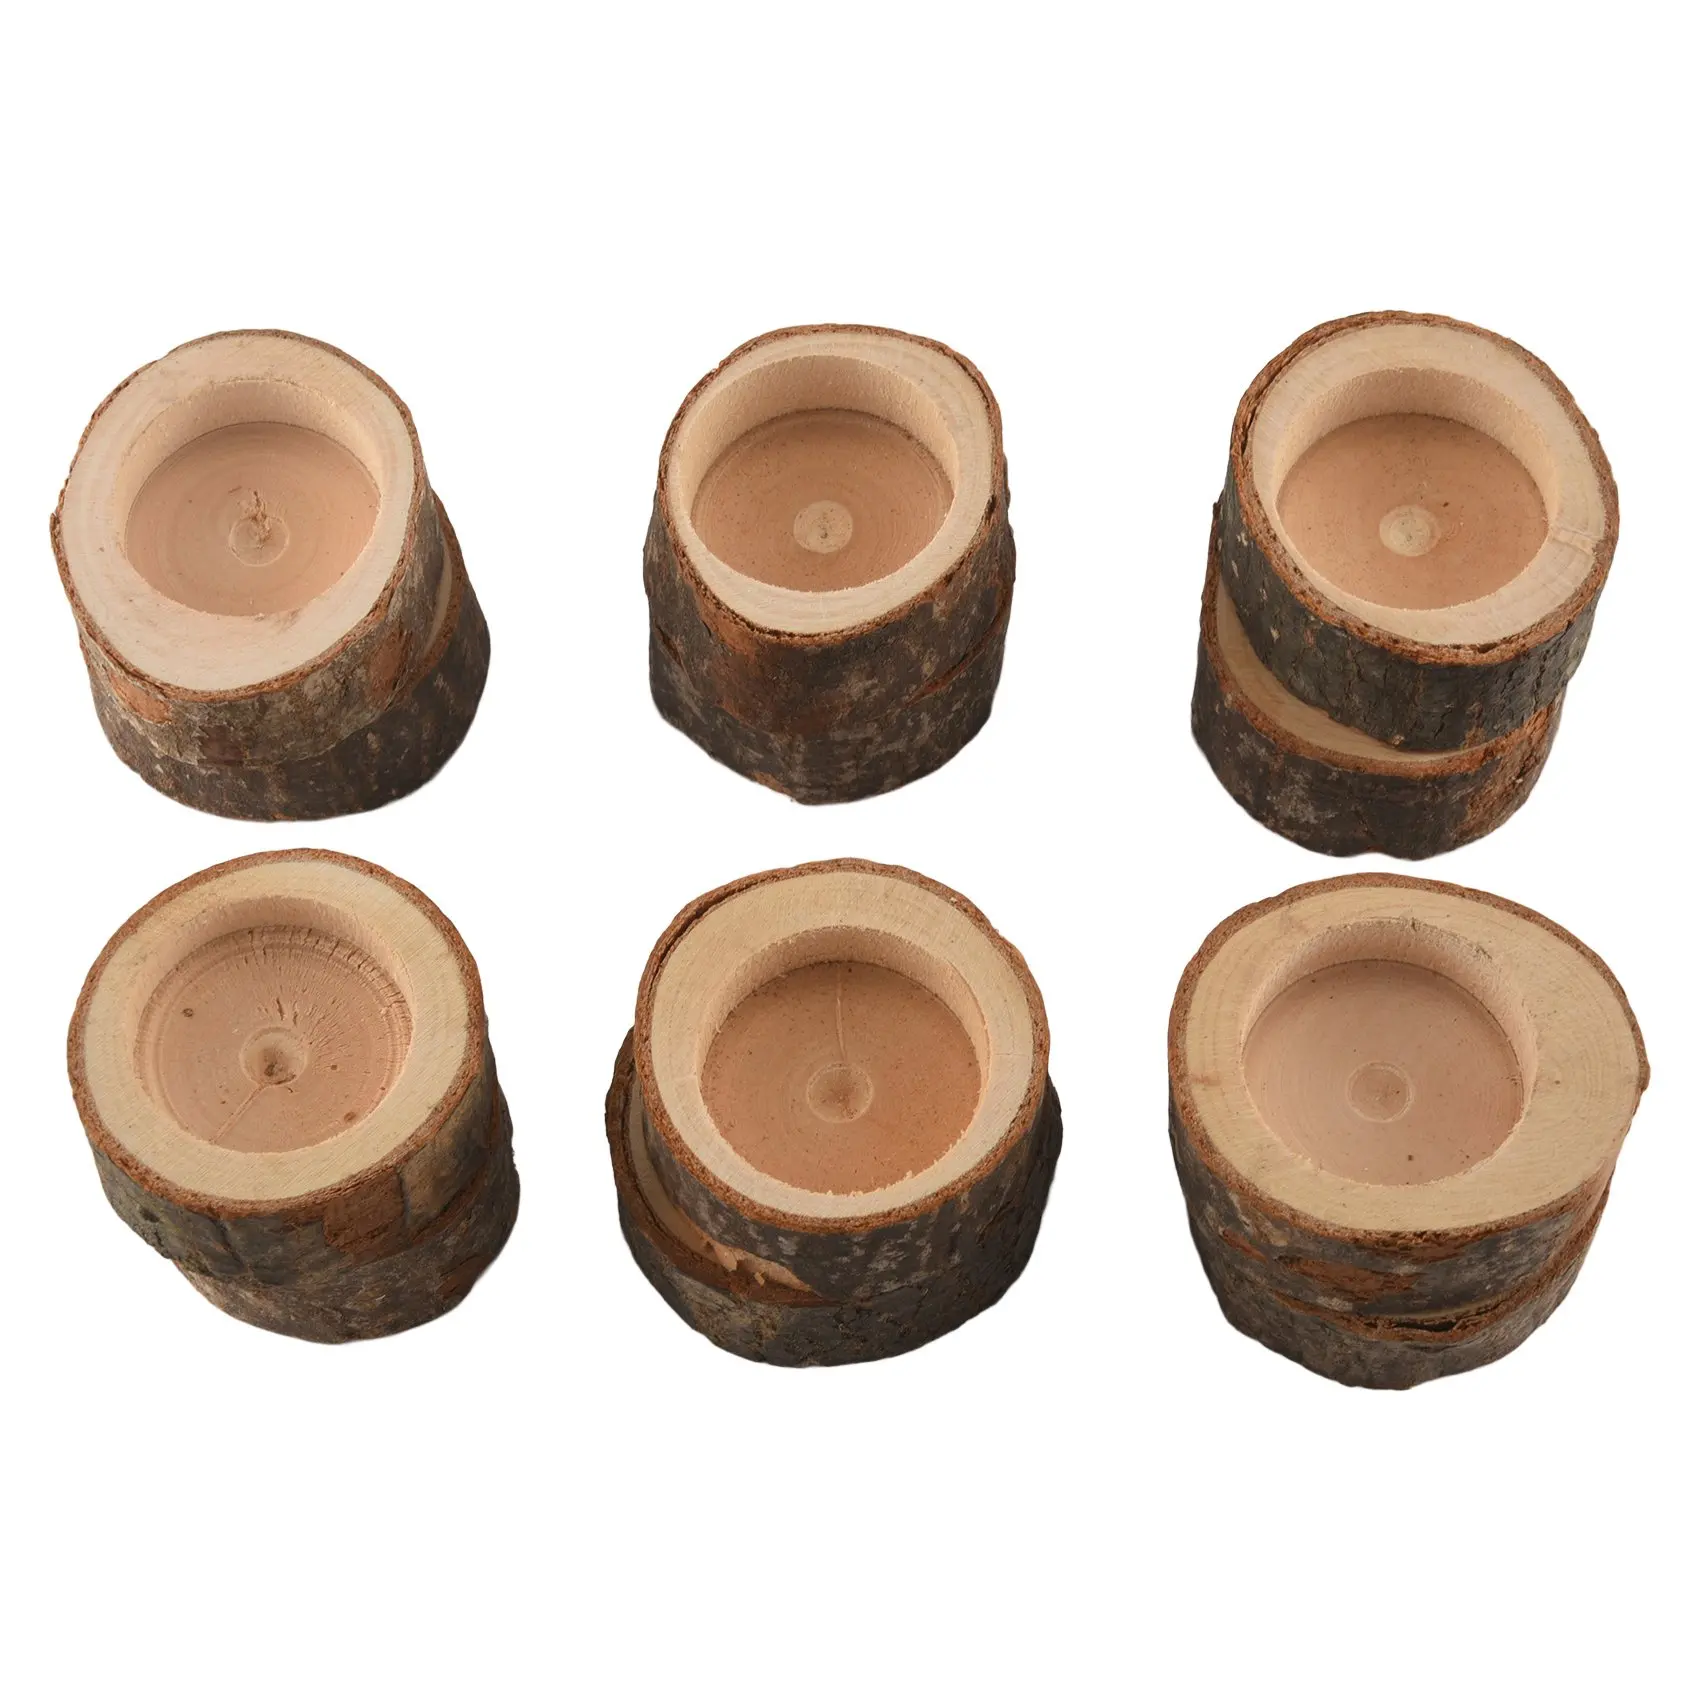 

12Pcs Wooden Candle Holder,Votive Tealight Holder for Wedding Party for Table,Halloween Christmas Party Home Decor